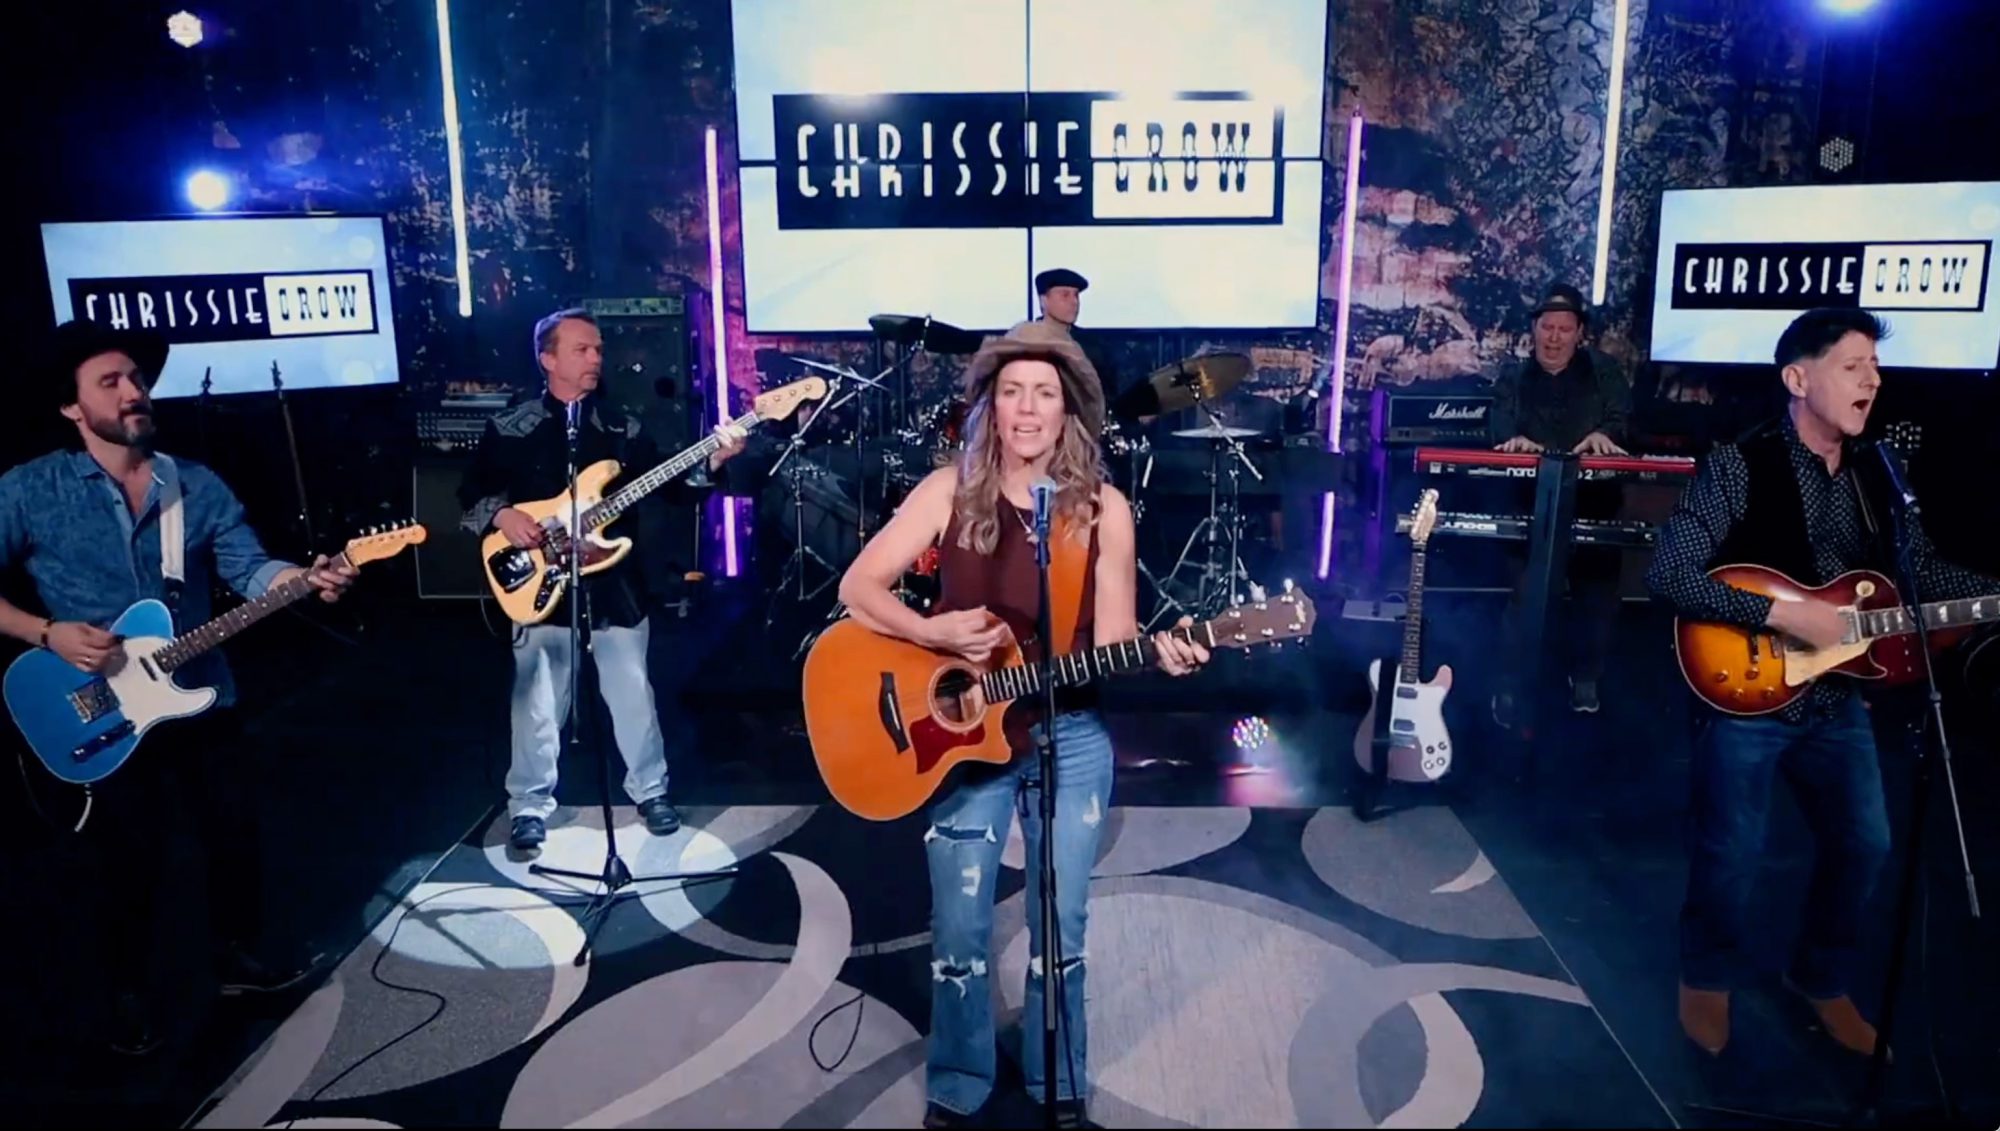 Chrissie Crow Band playing on stage